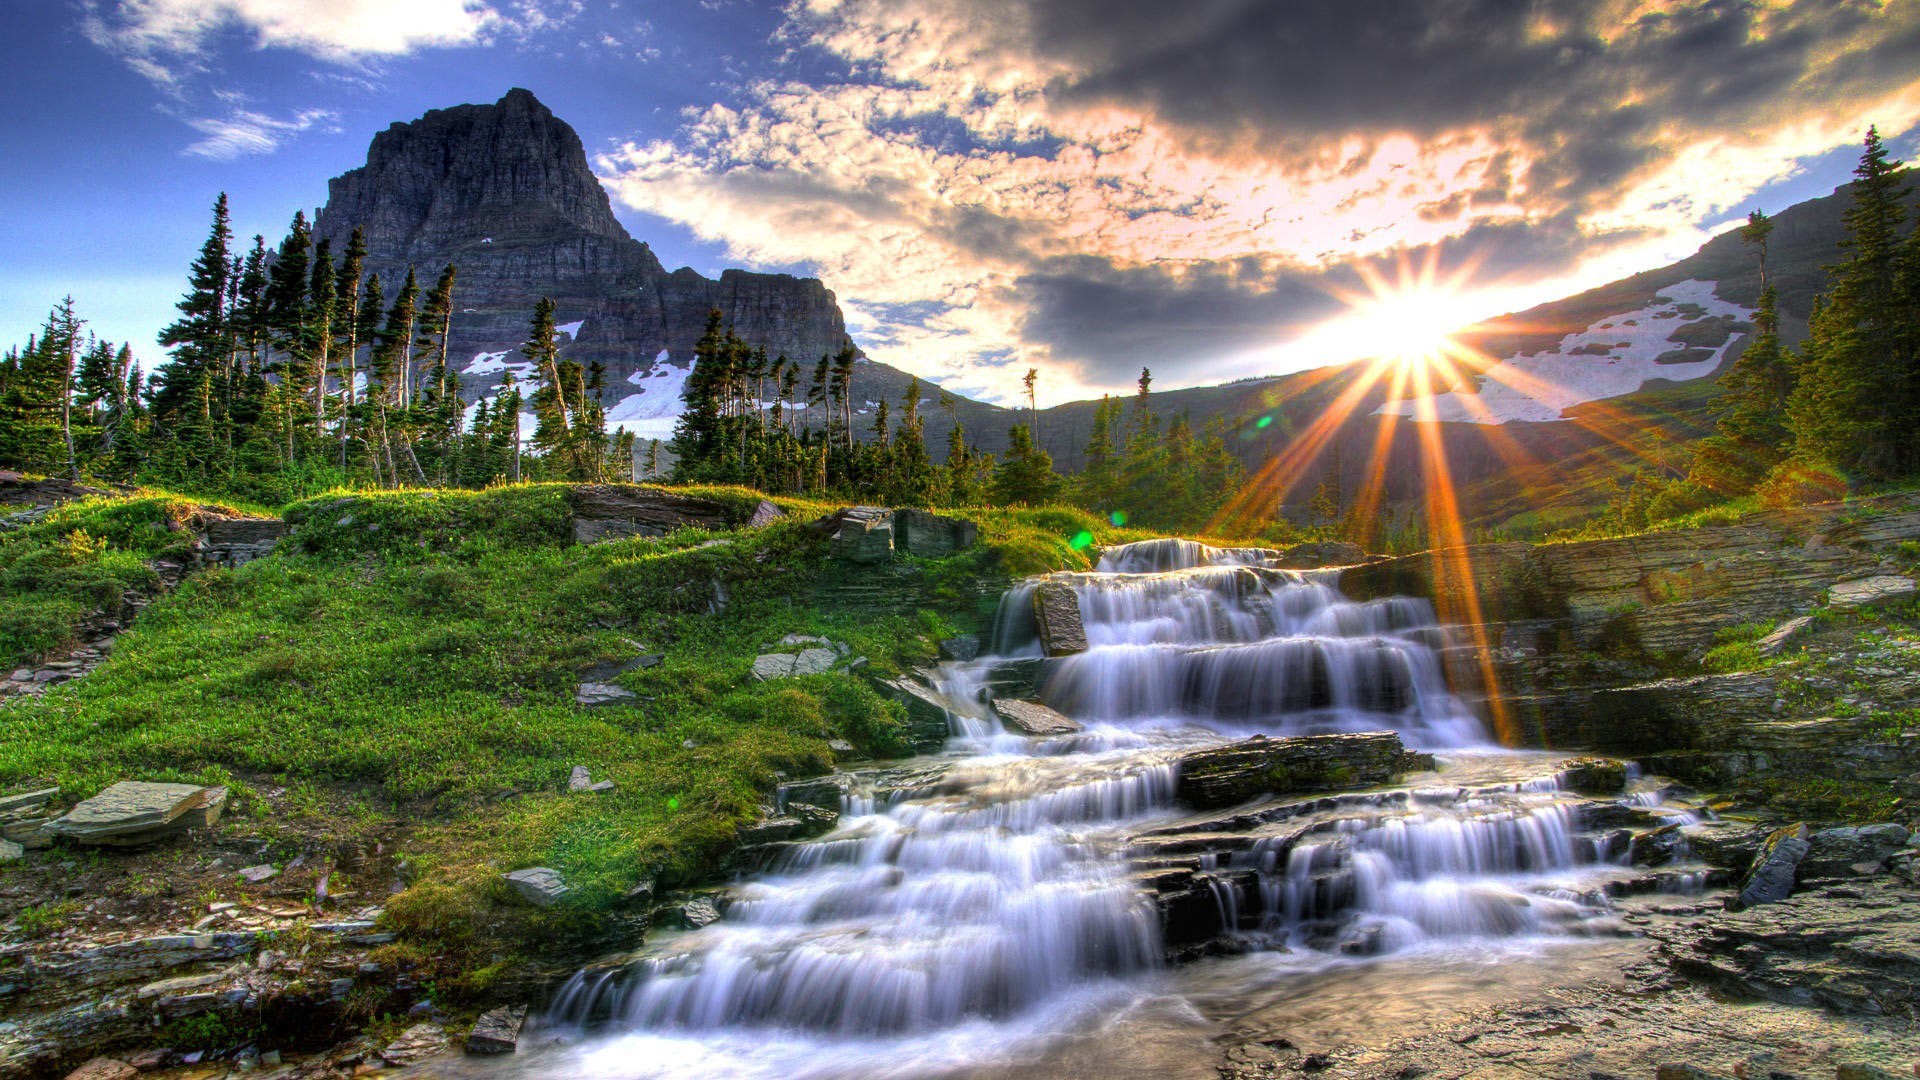 1920x1080 Full HD Waterfall Nature Landscape Wallpapers For Mobile